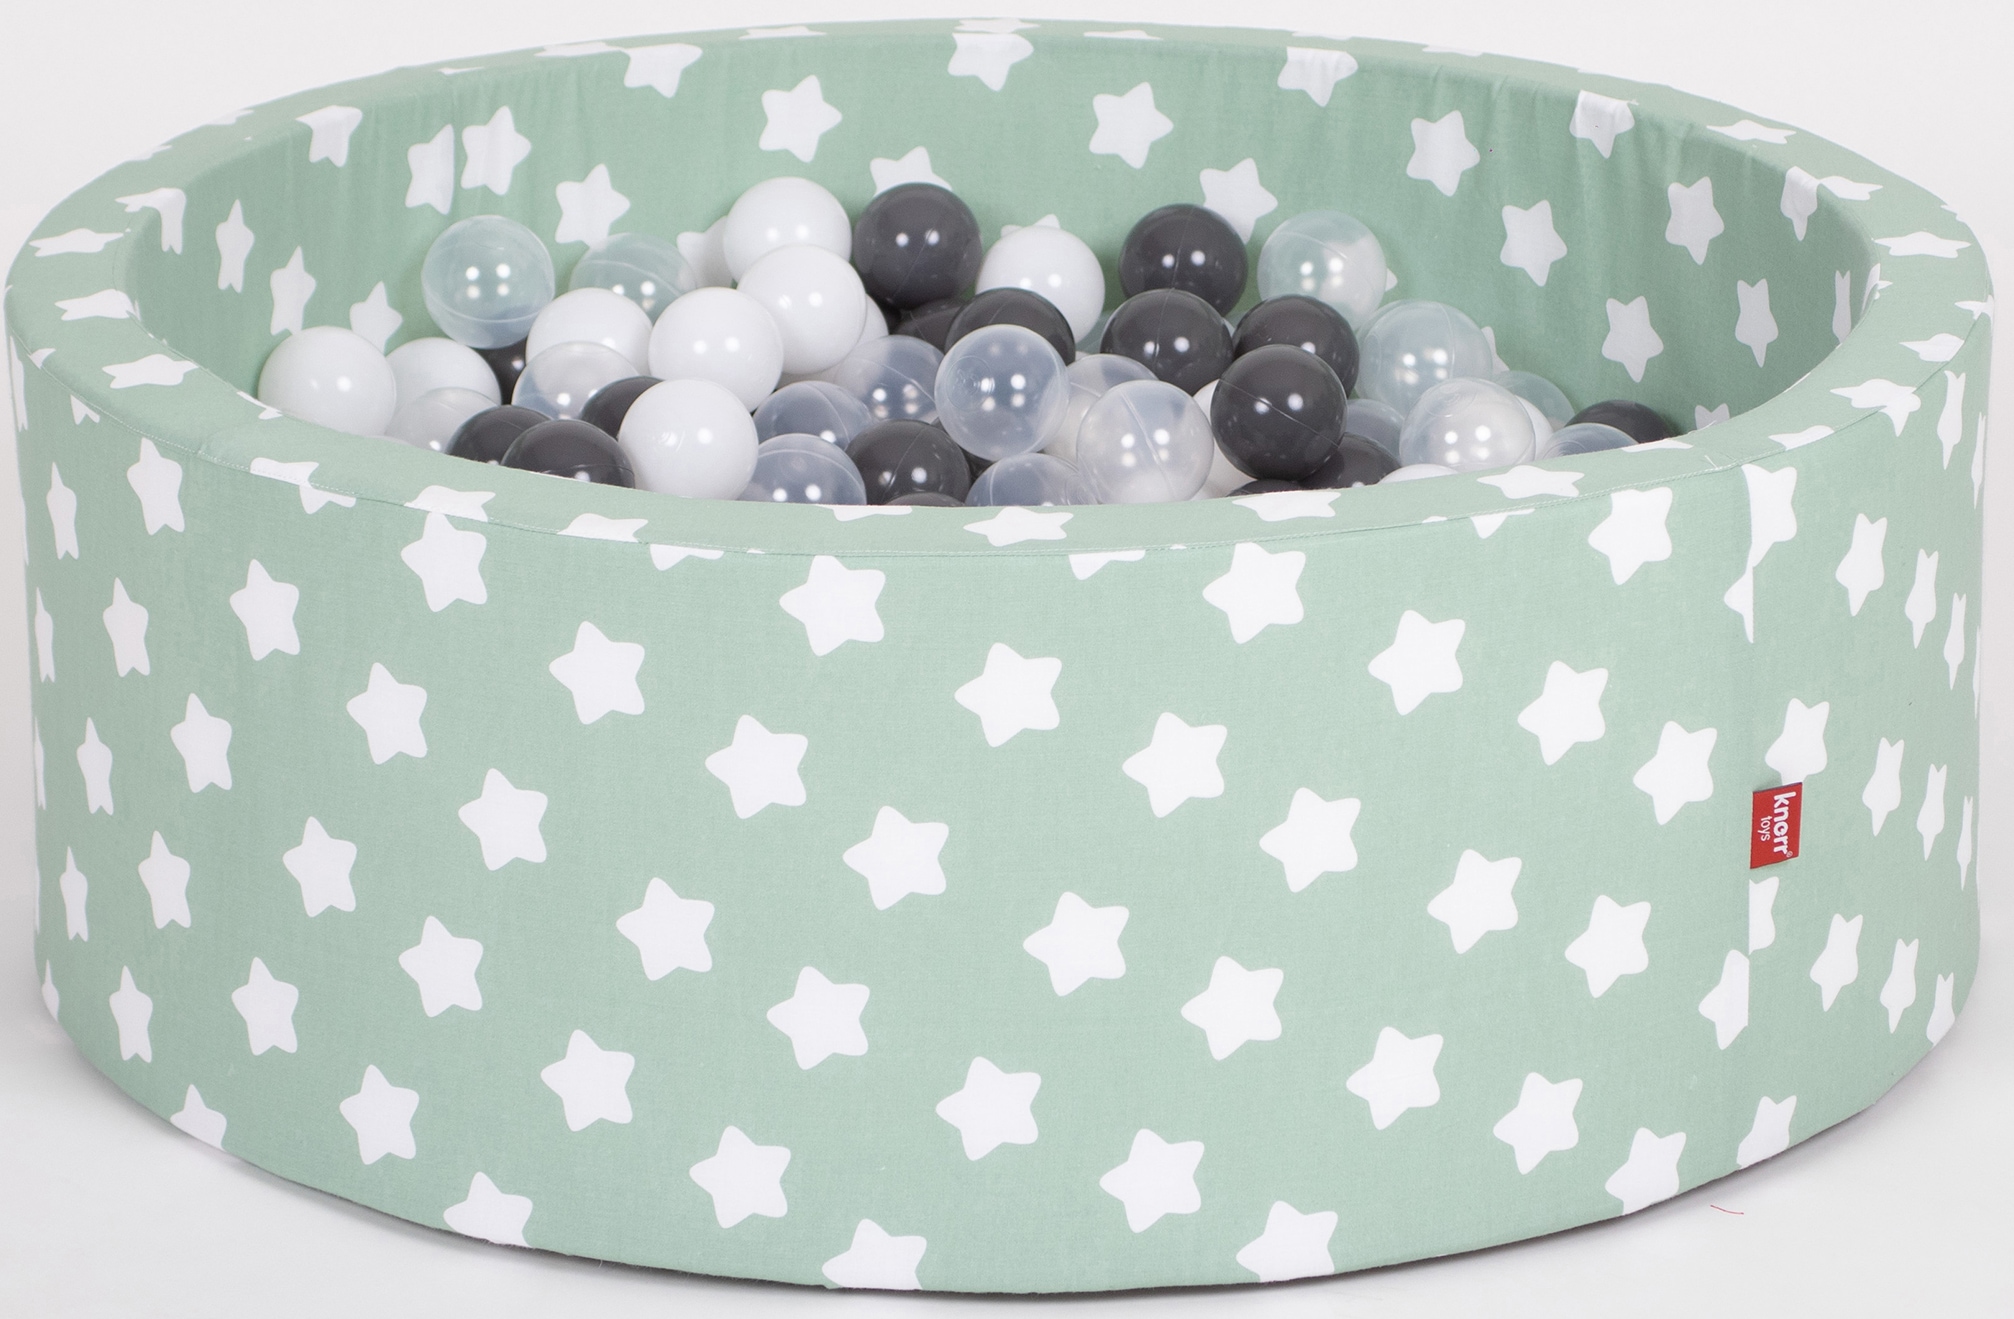 Knorrtoys® Bällebad »Soft, Green White Stars«, mit300 Bälle grey/white/transparent; Made in Europe